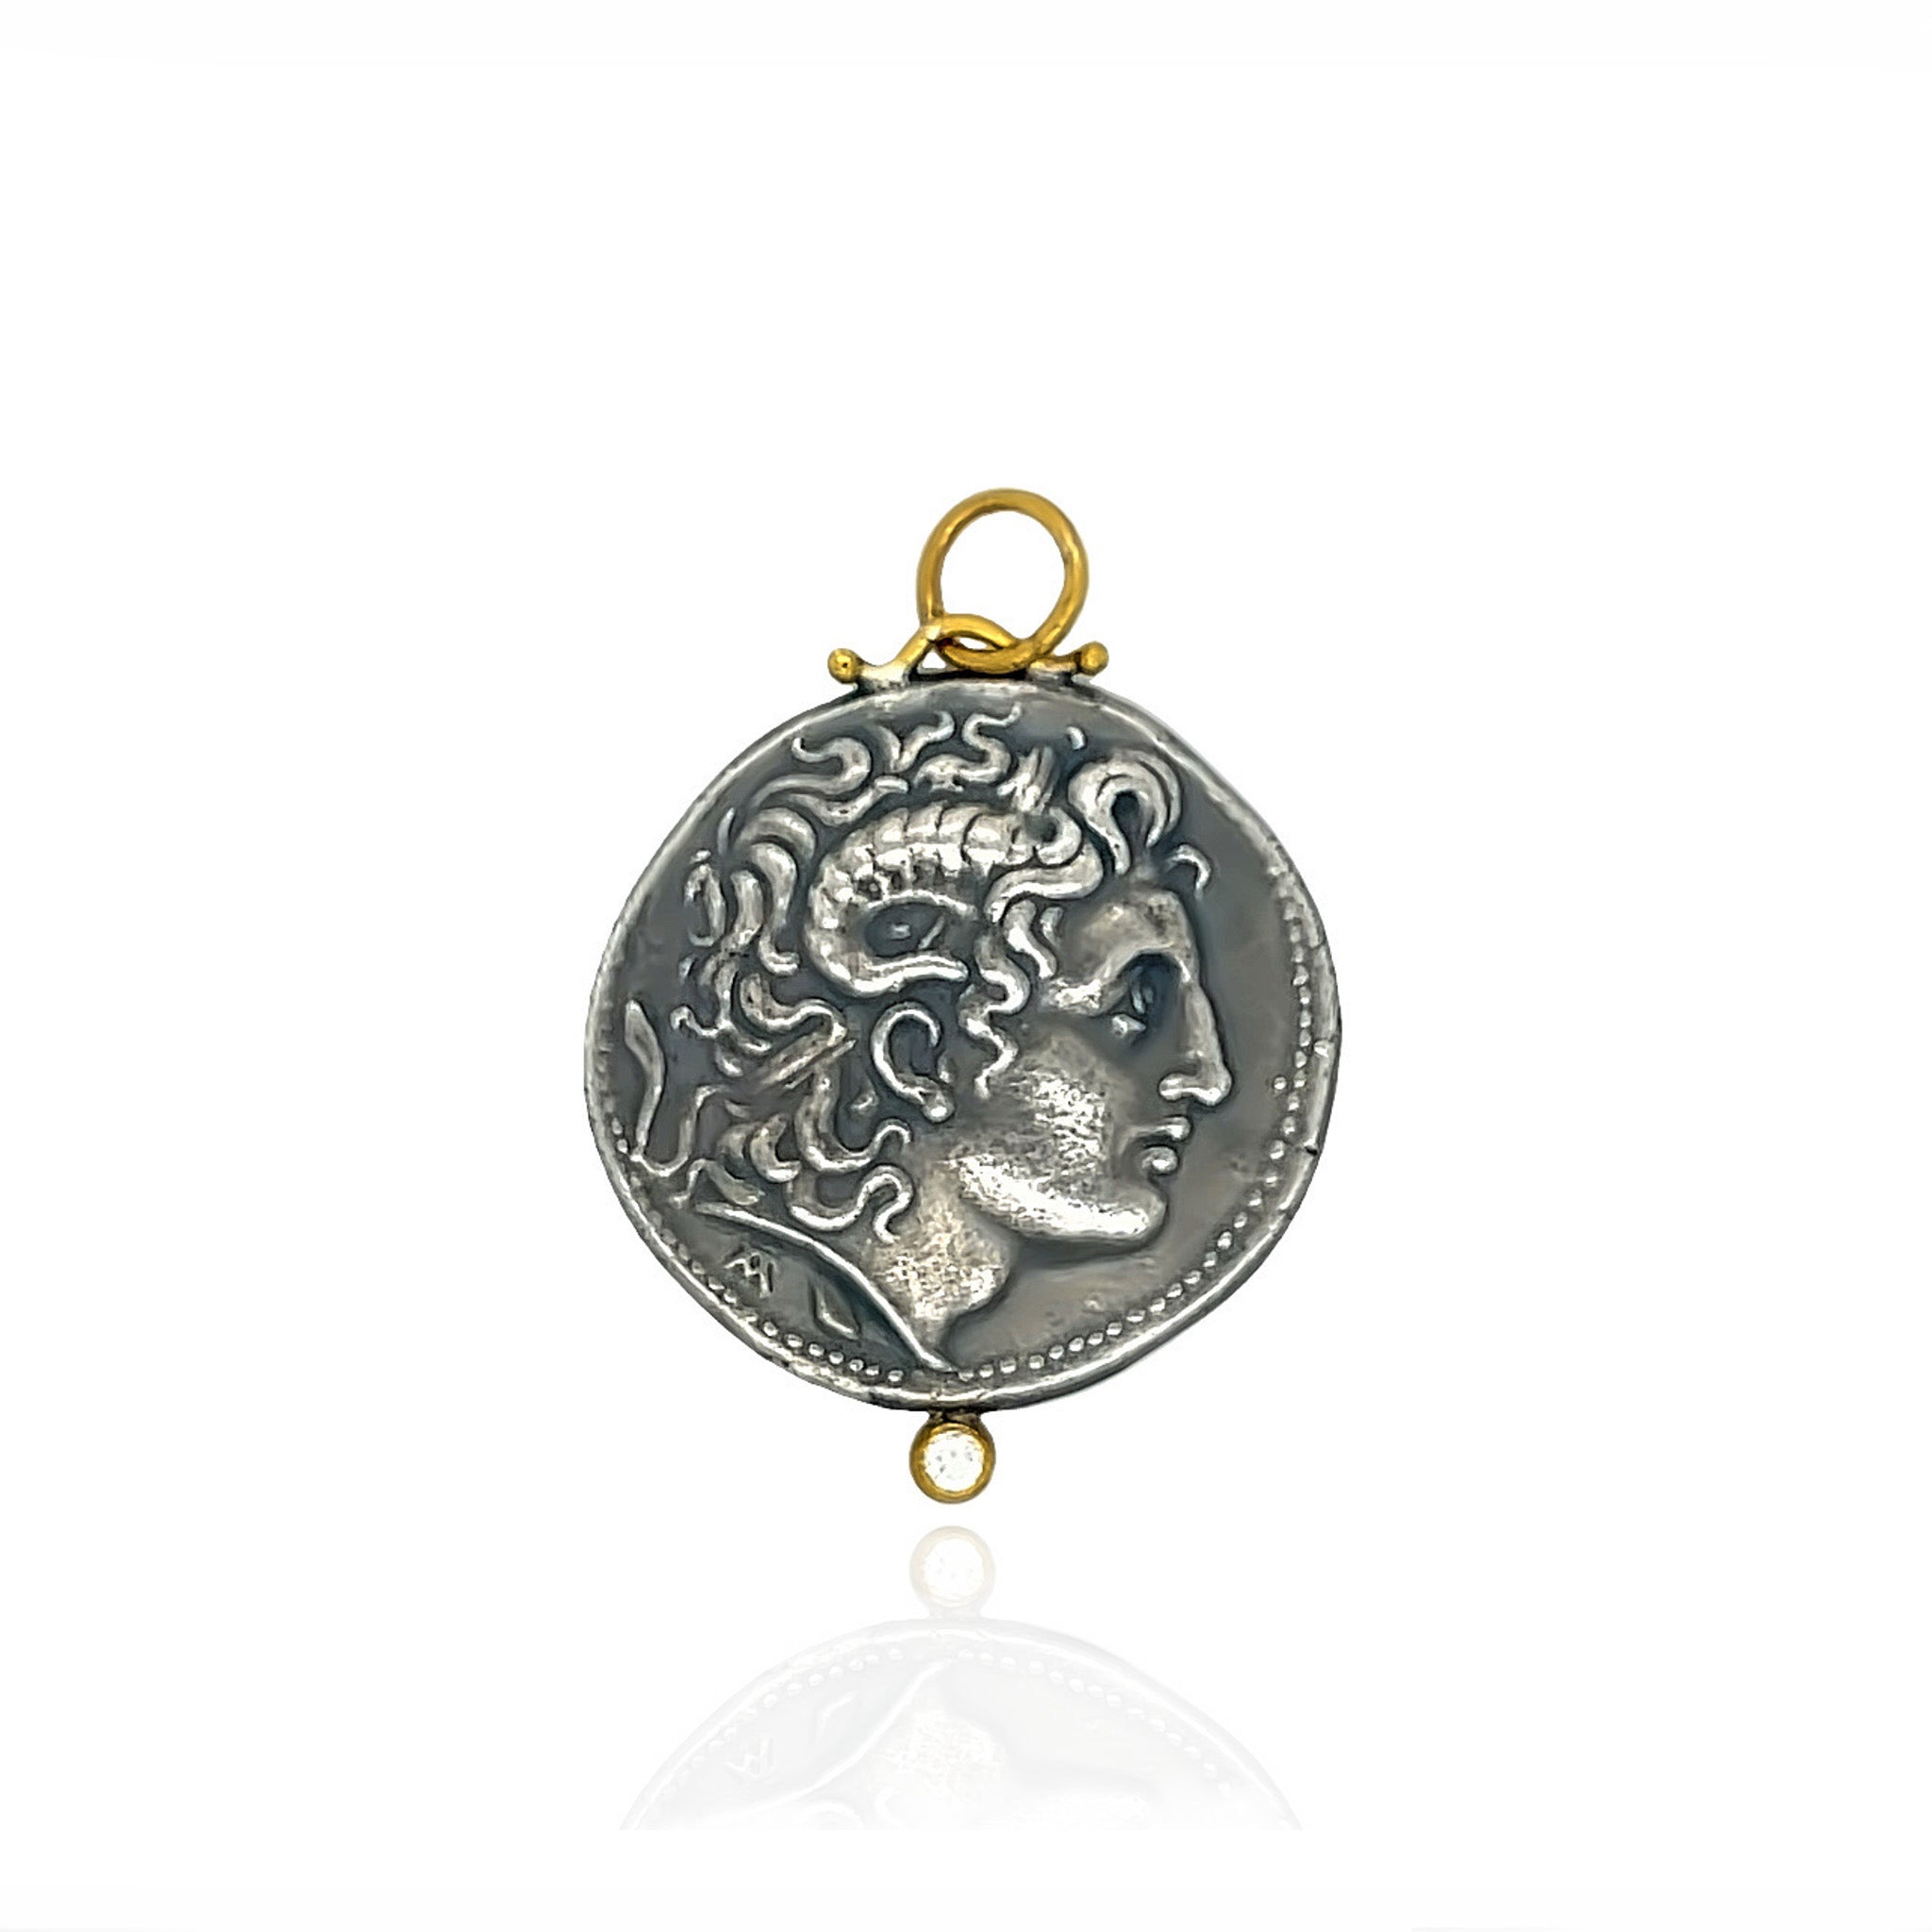 Alexander the Great Ancient Greek Coin Replica